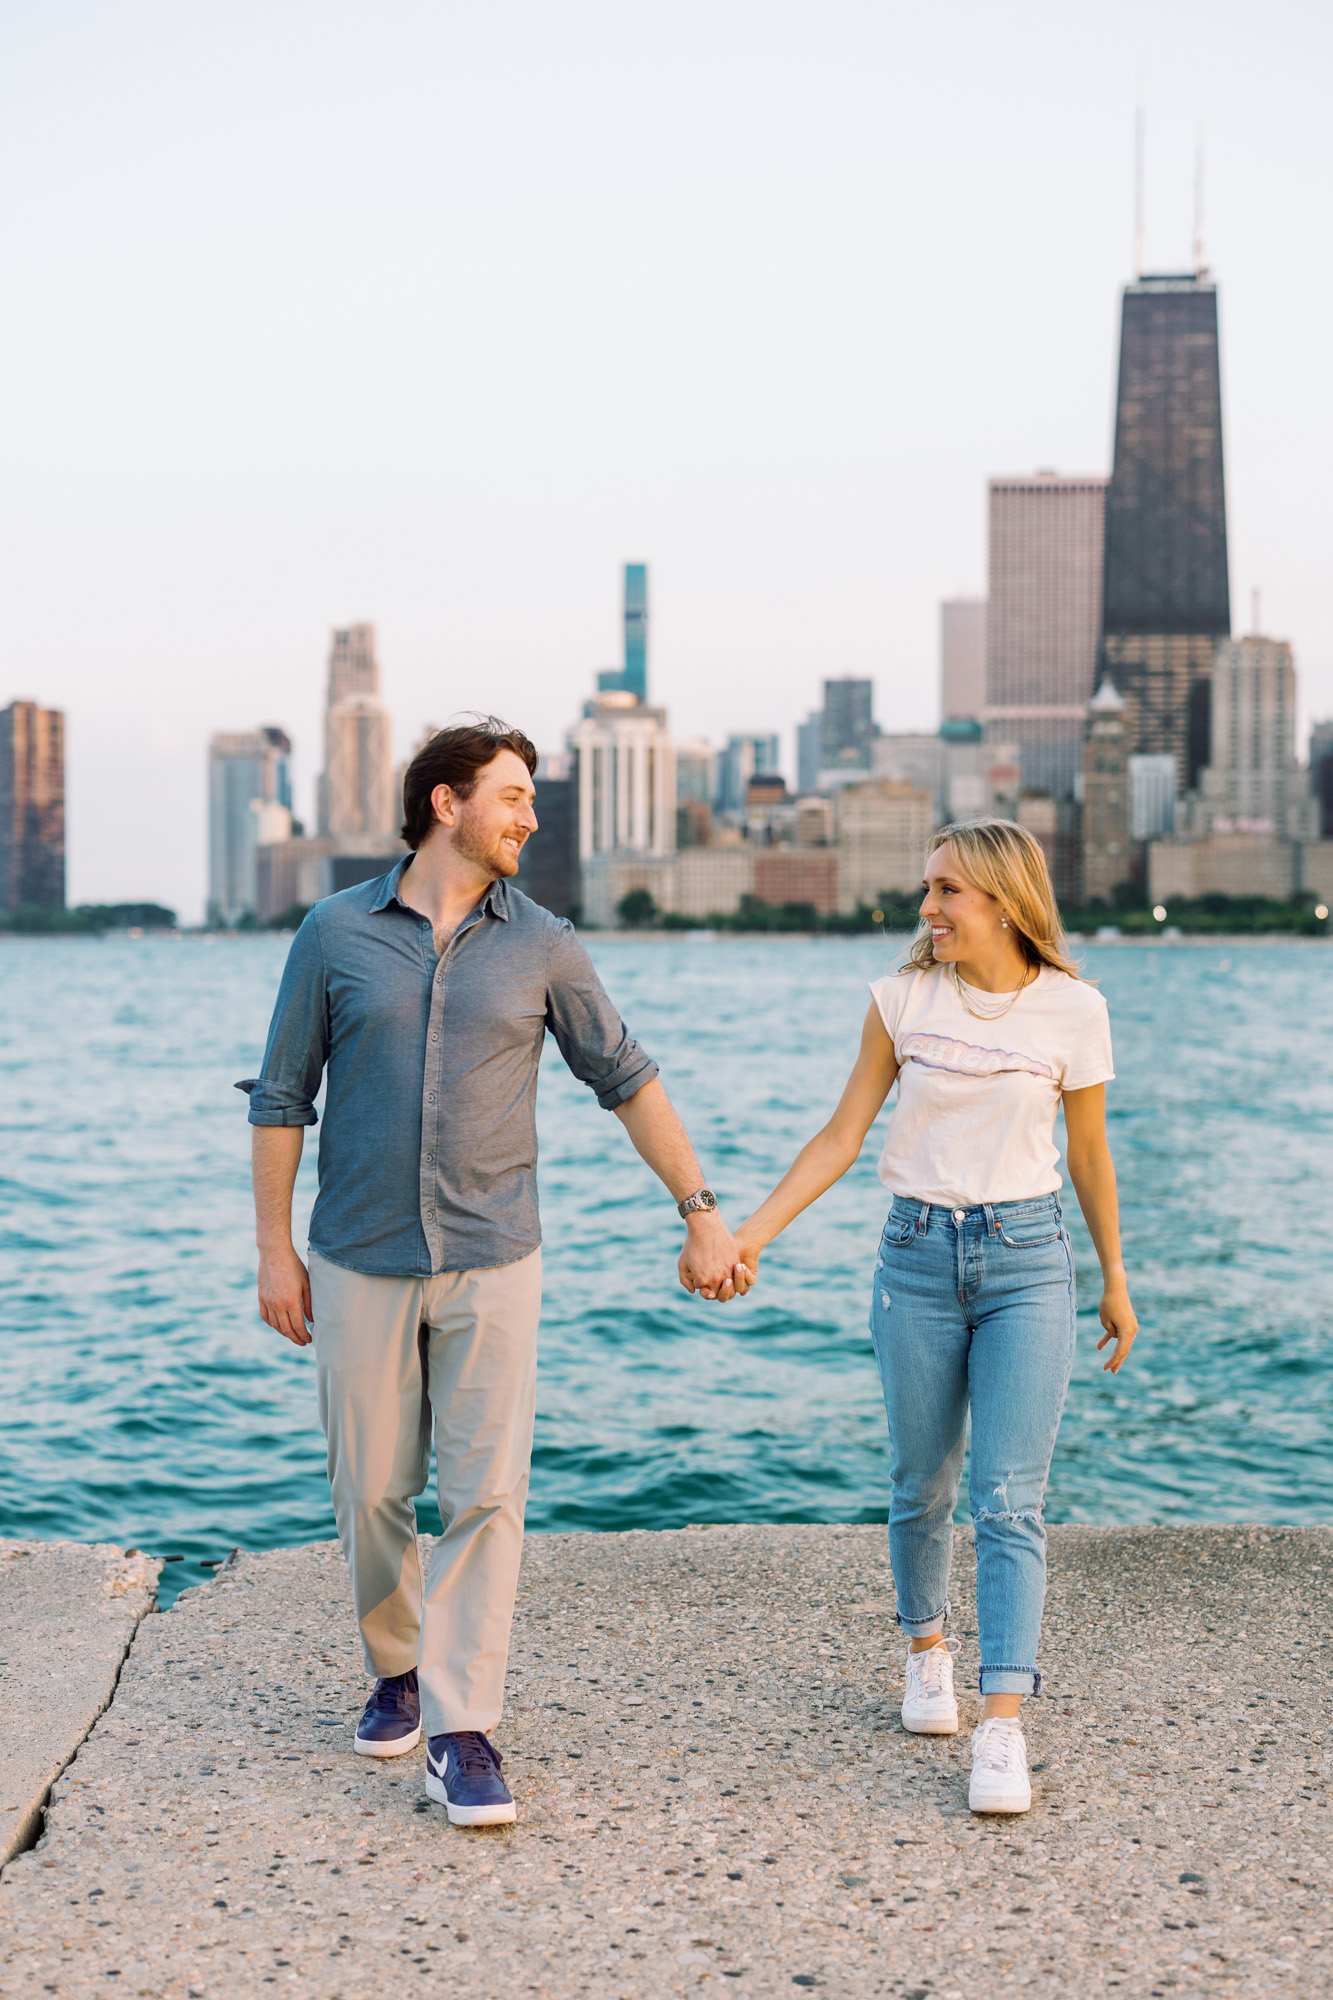 A North Avenue Beach engagement photo in Lincoln Park.